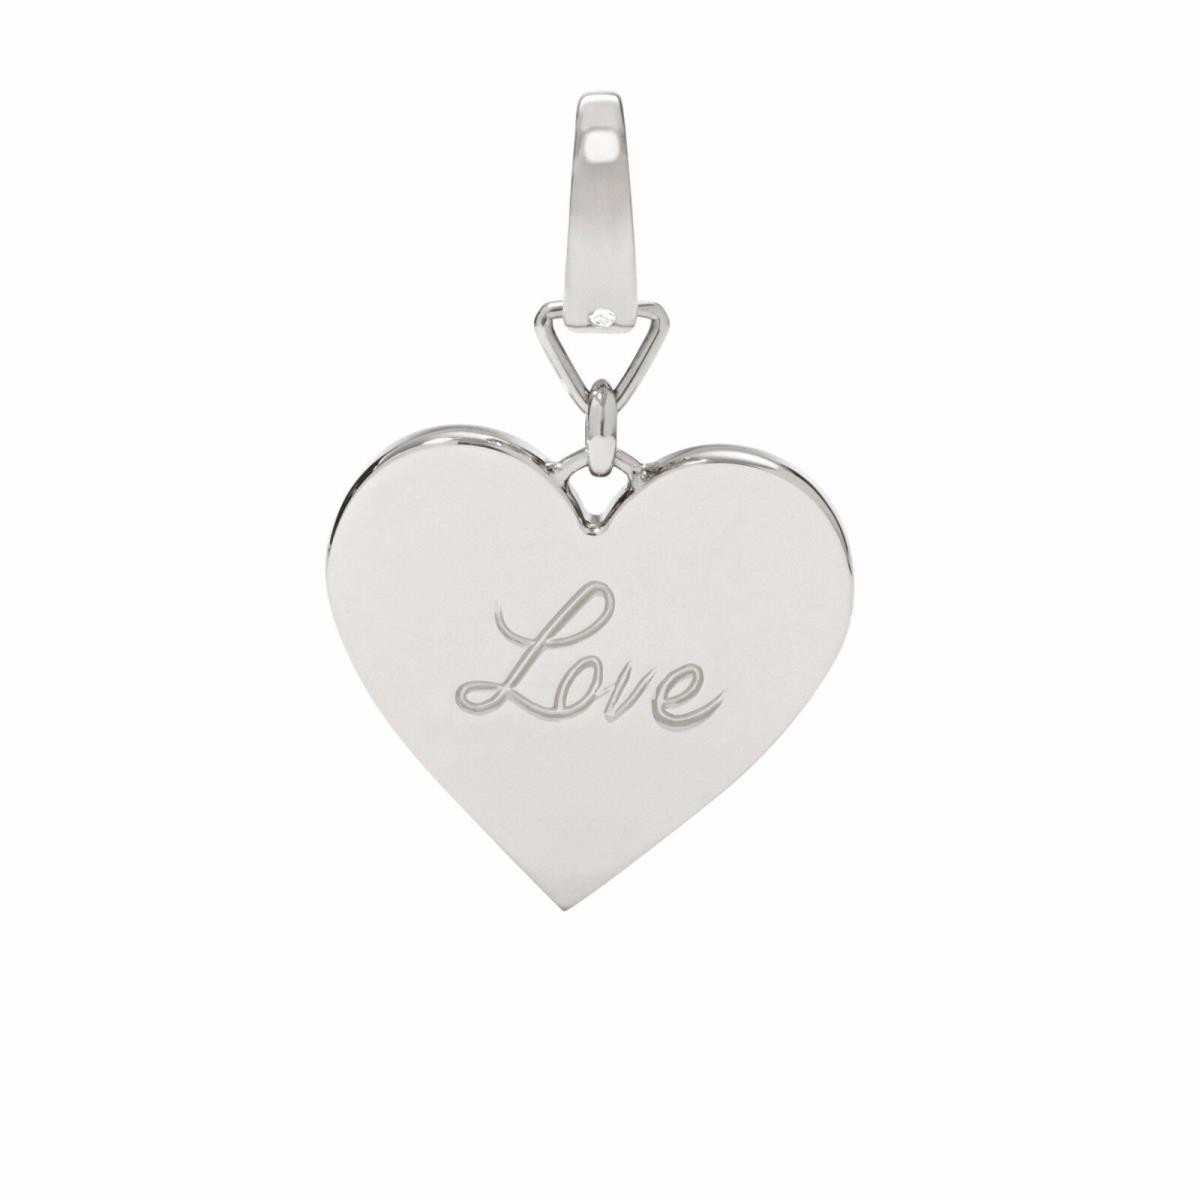 New-fossil Silver Steel Love Charm Pendant JF00724040+POUCH